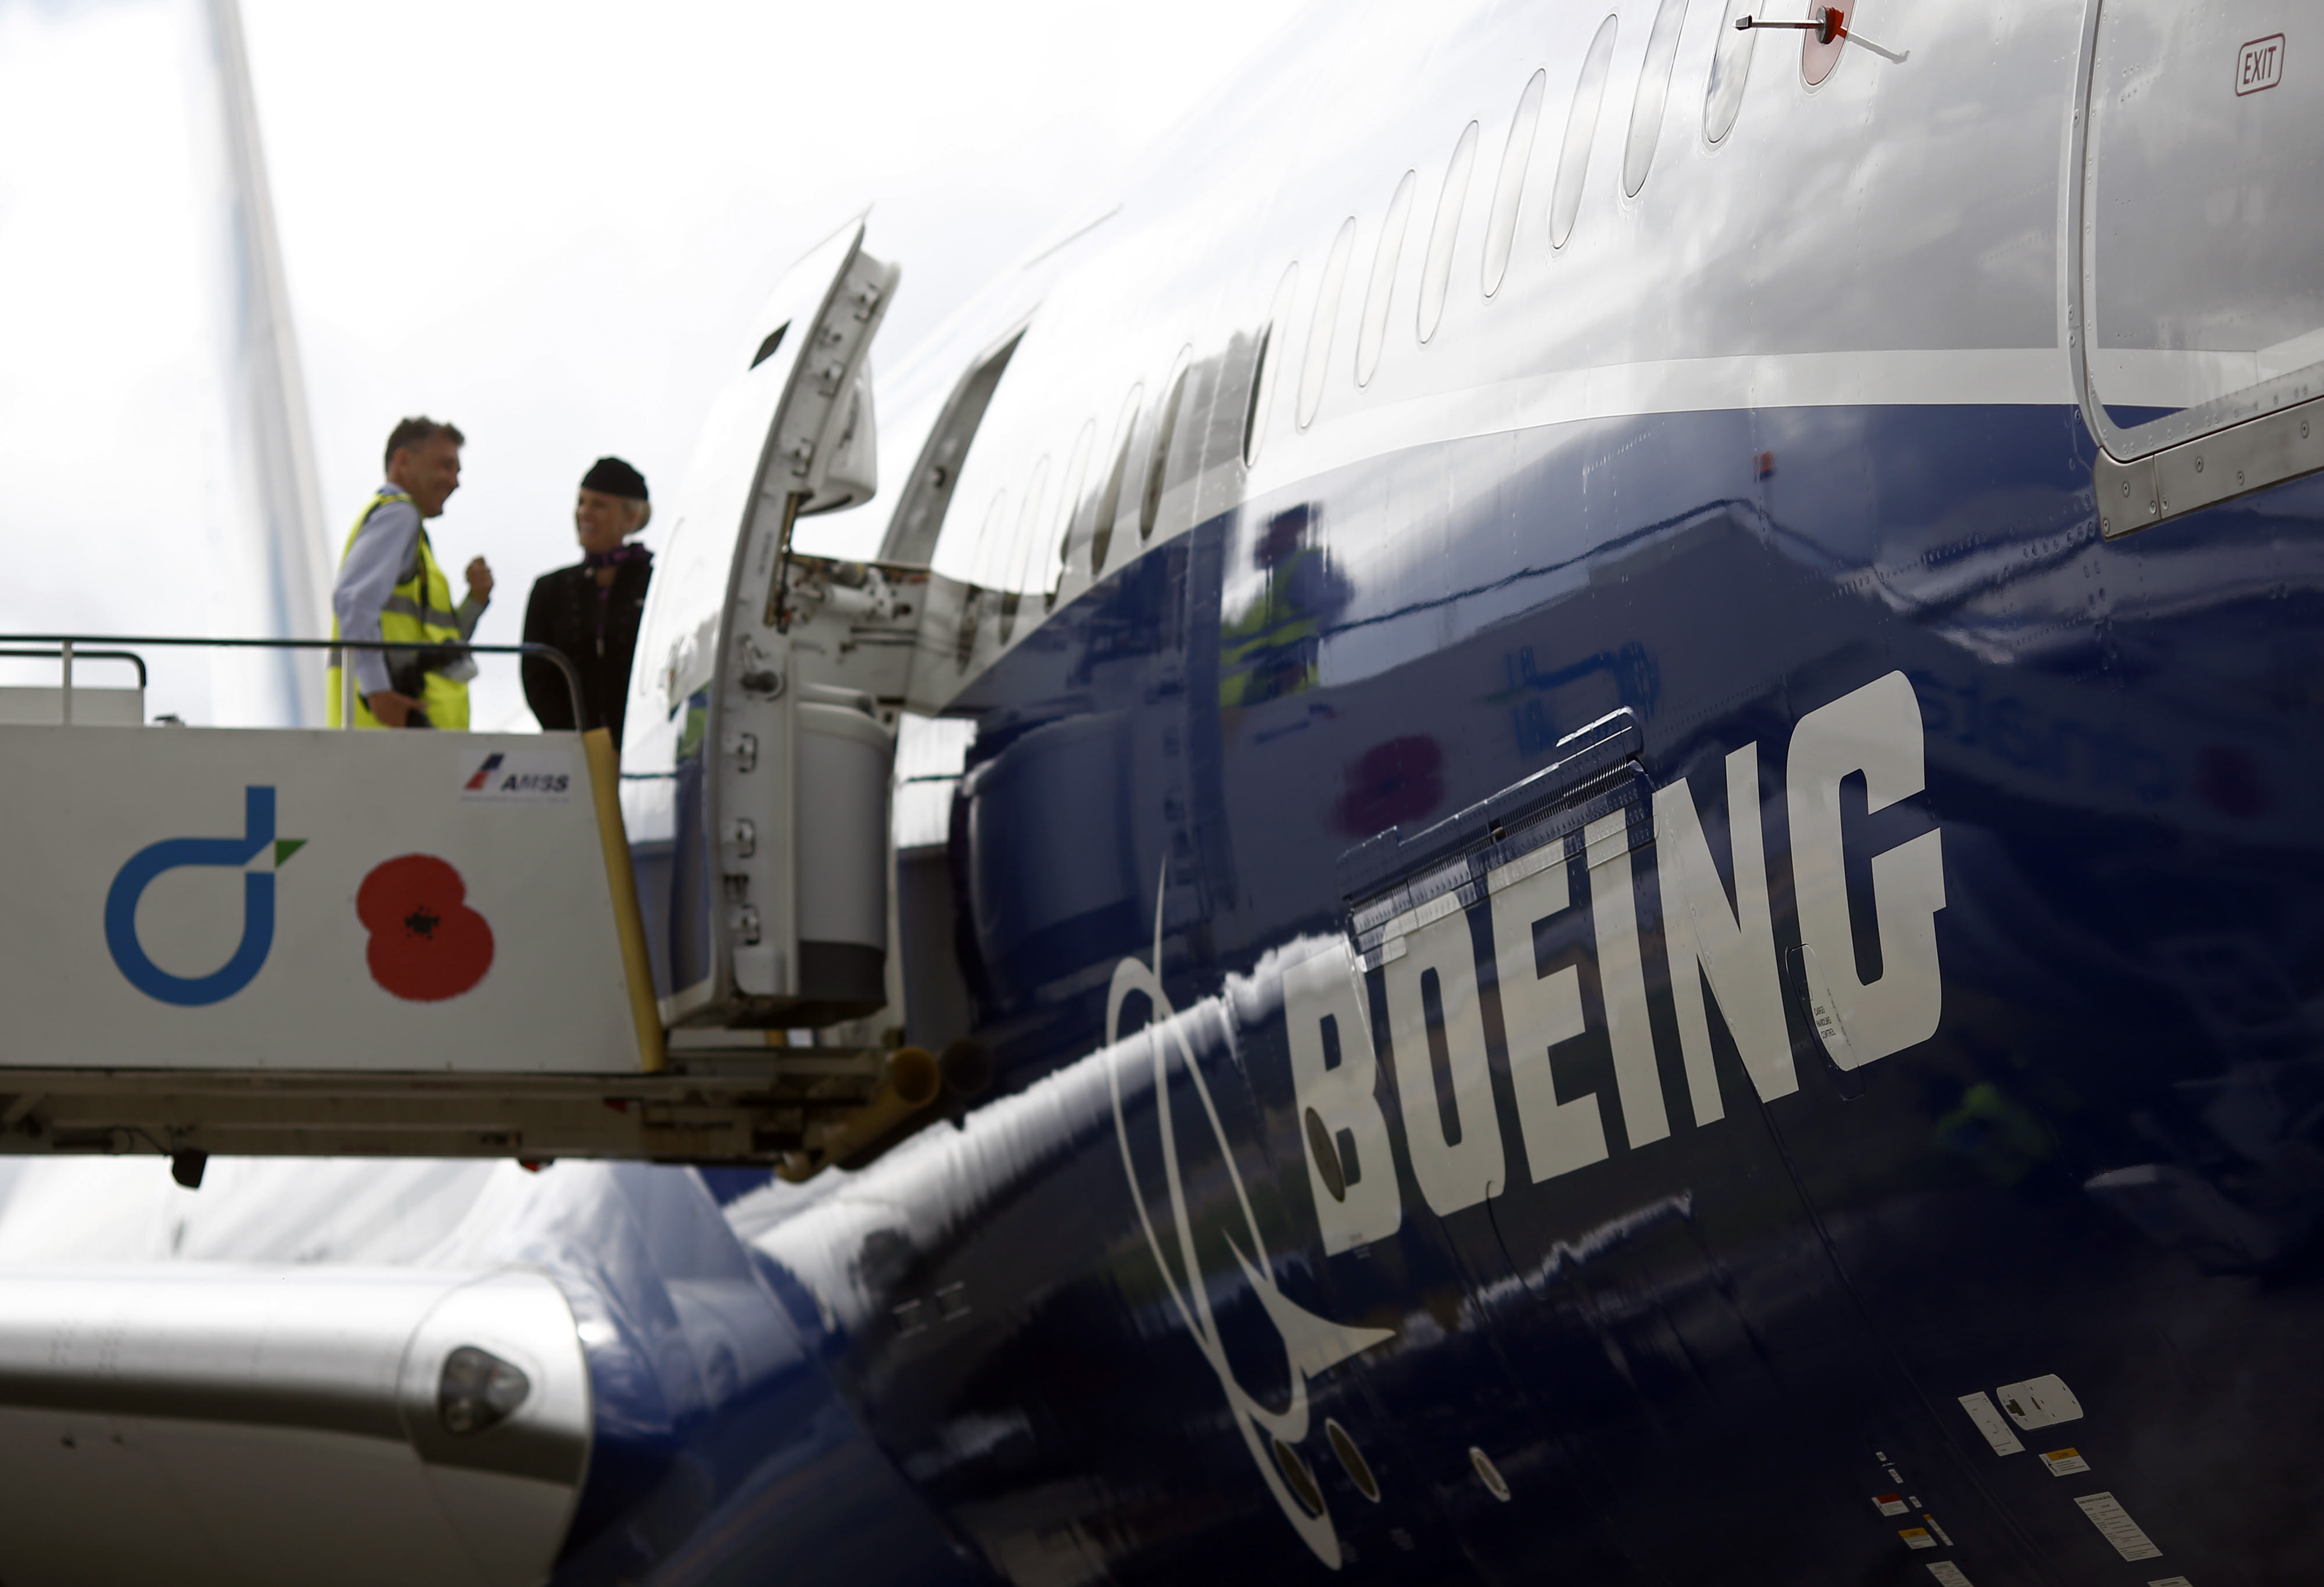 FAA reviews Boeing Dreamliner quality-control lapses, WSJ reports